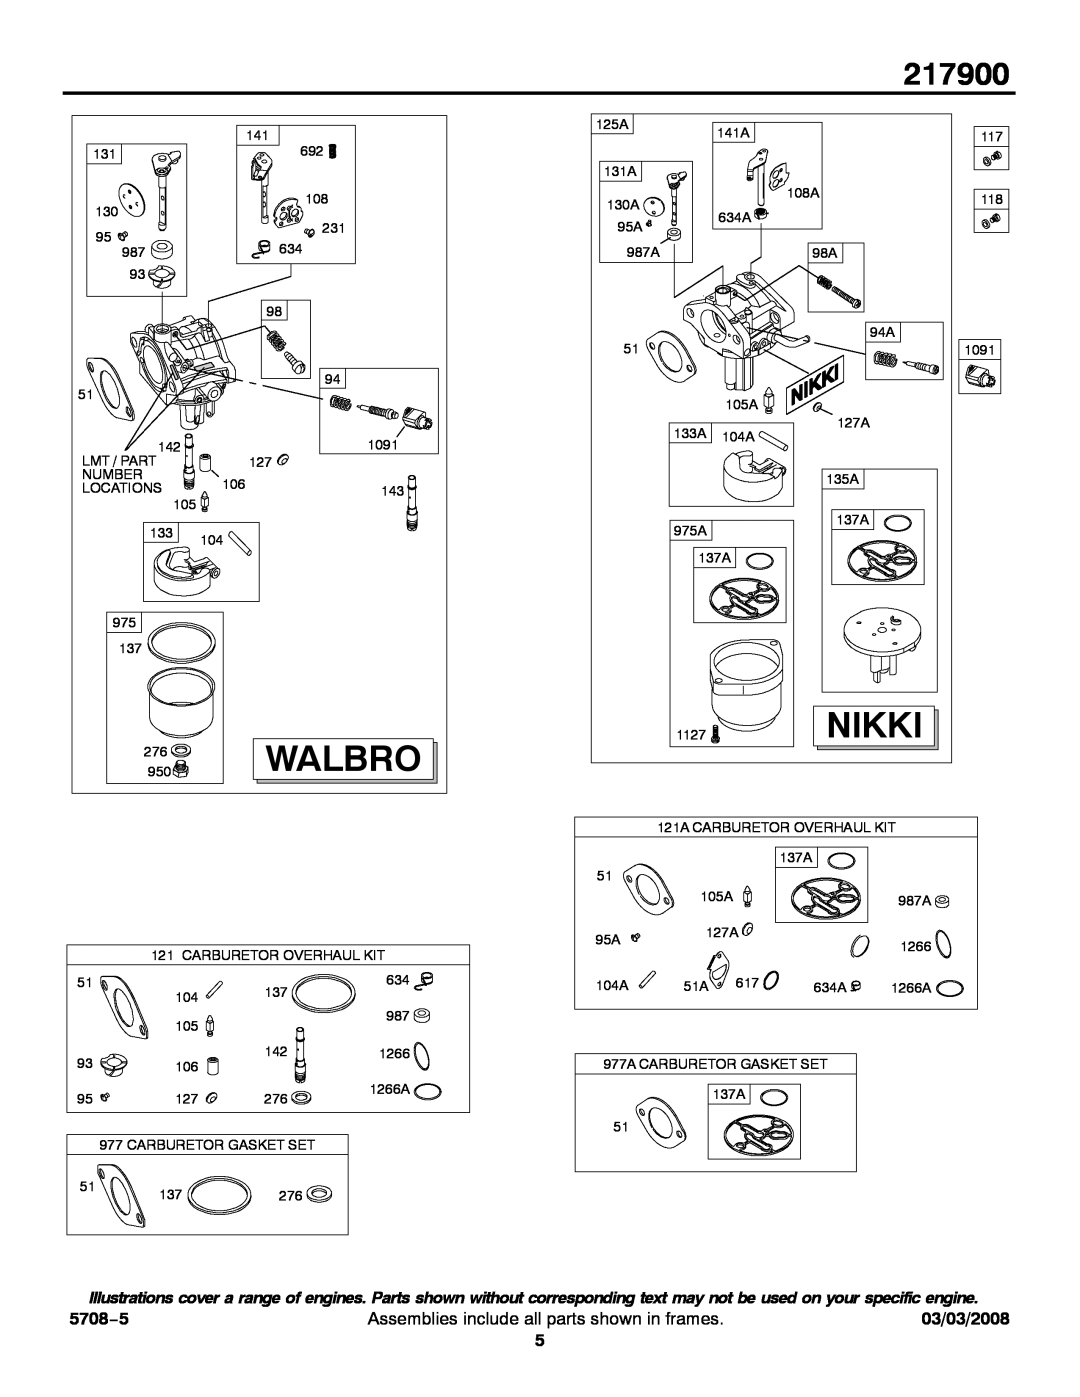 Briggs & Stratton 217900 service manual Walbro, 5708−5, Nikki, Assemblies include all parts shown in frames, 03/03/2008 